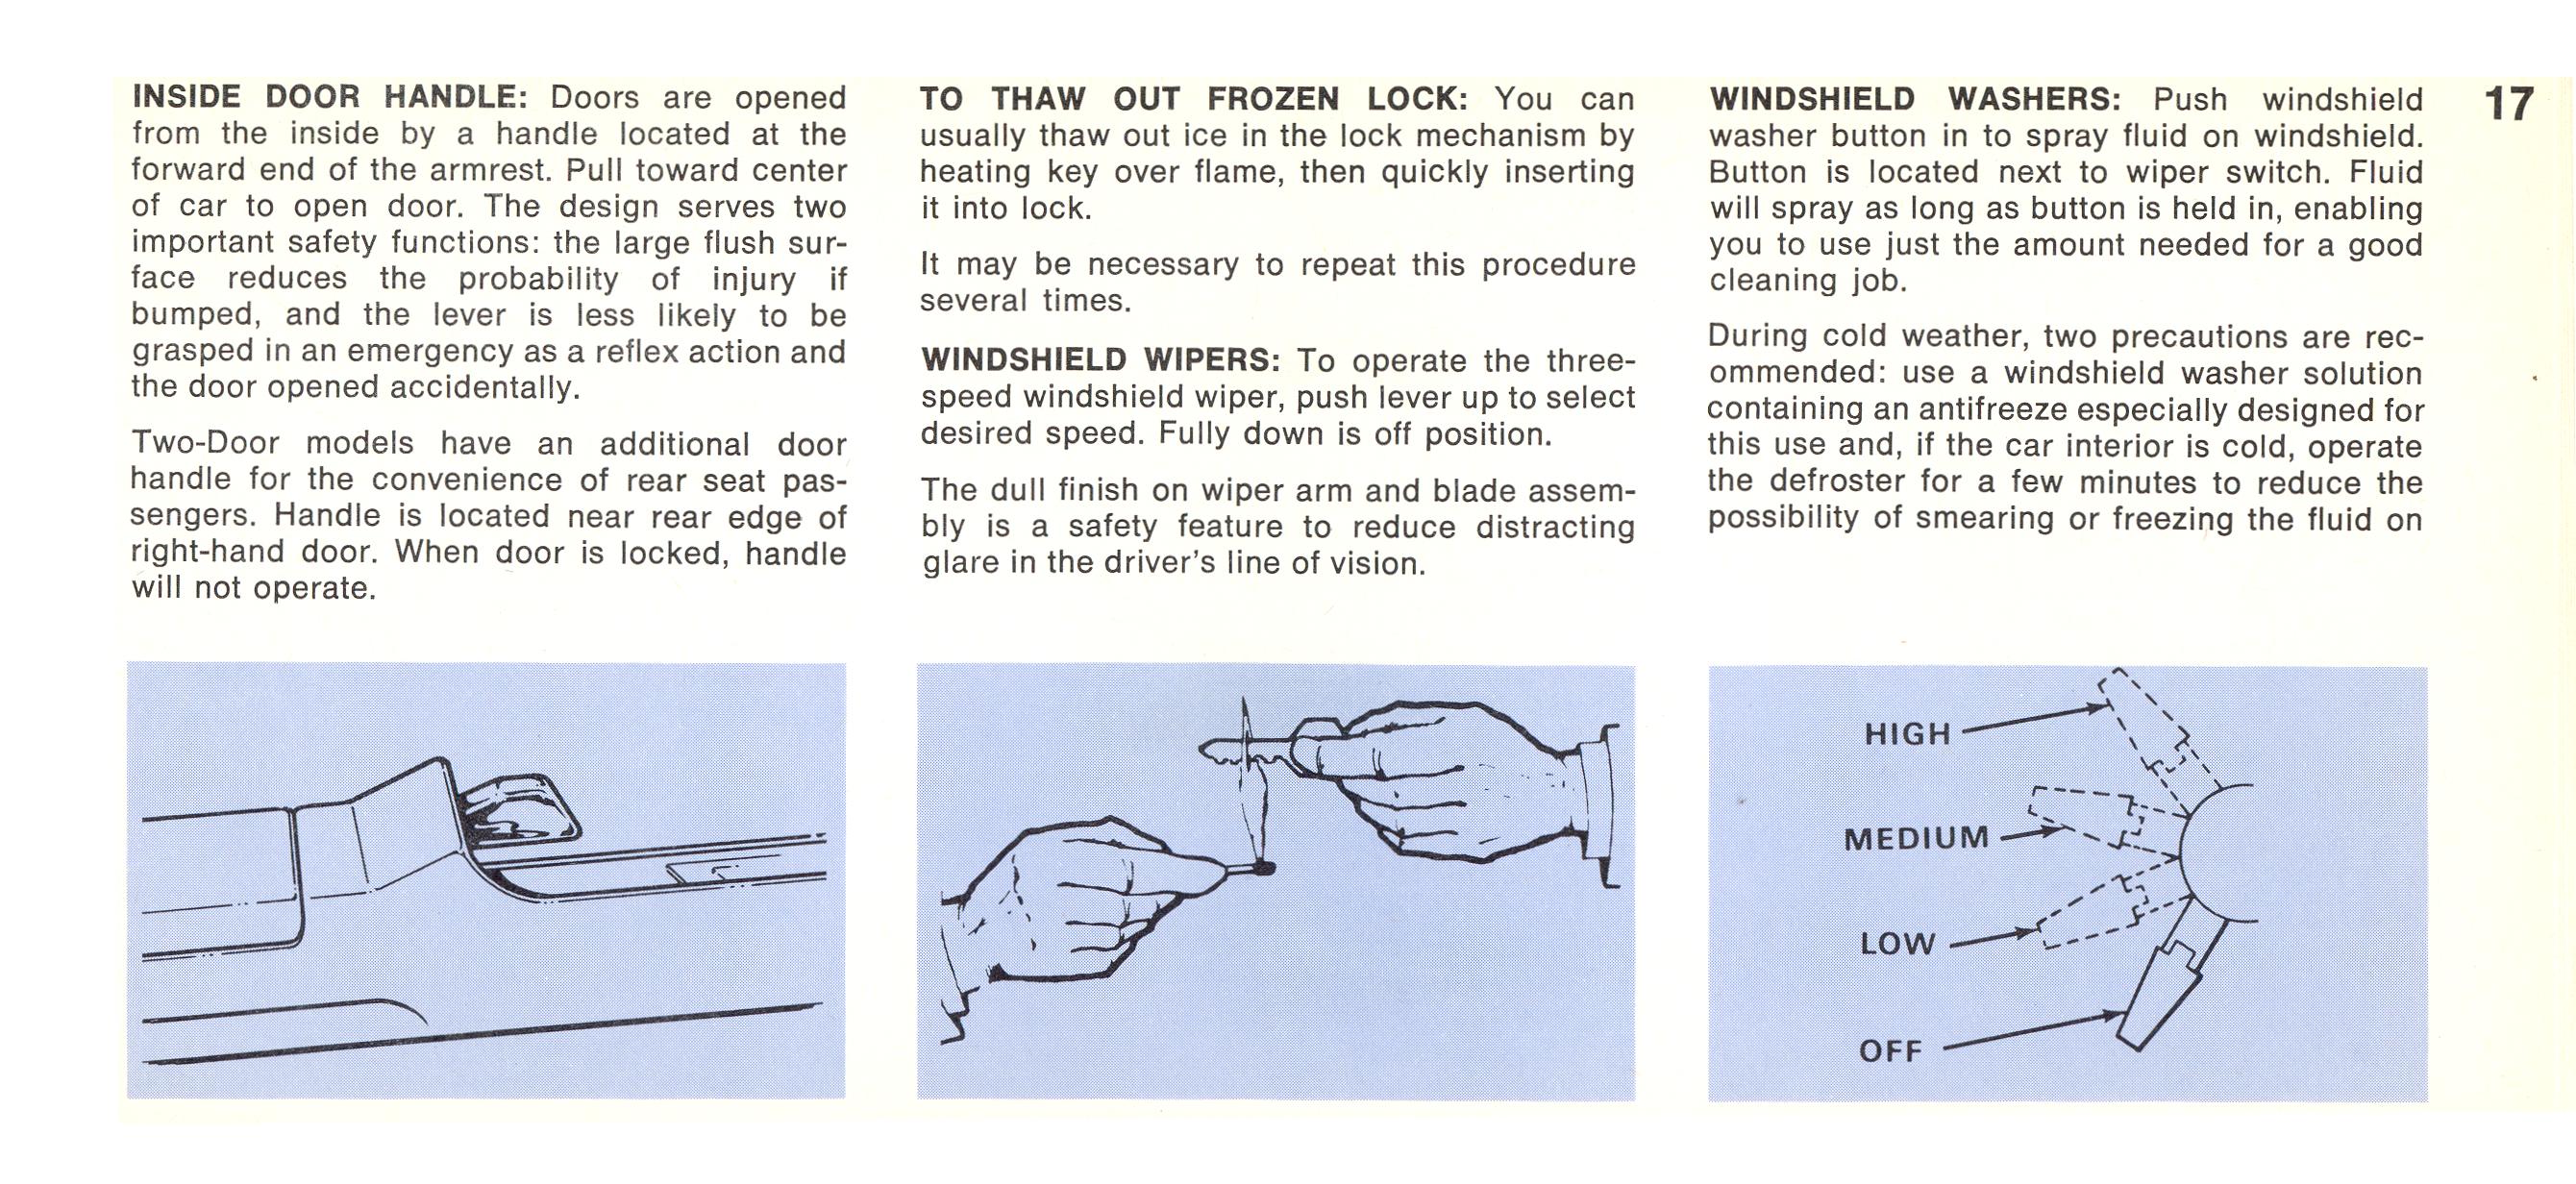 1968 Chrysler Imperial Owners Manual Page 37